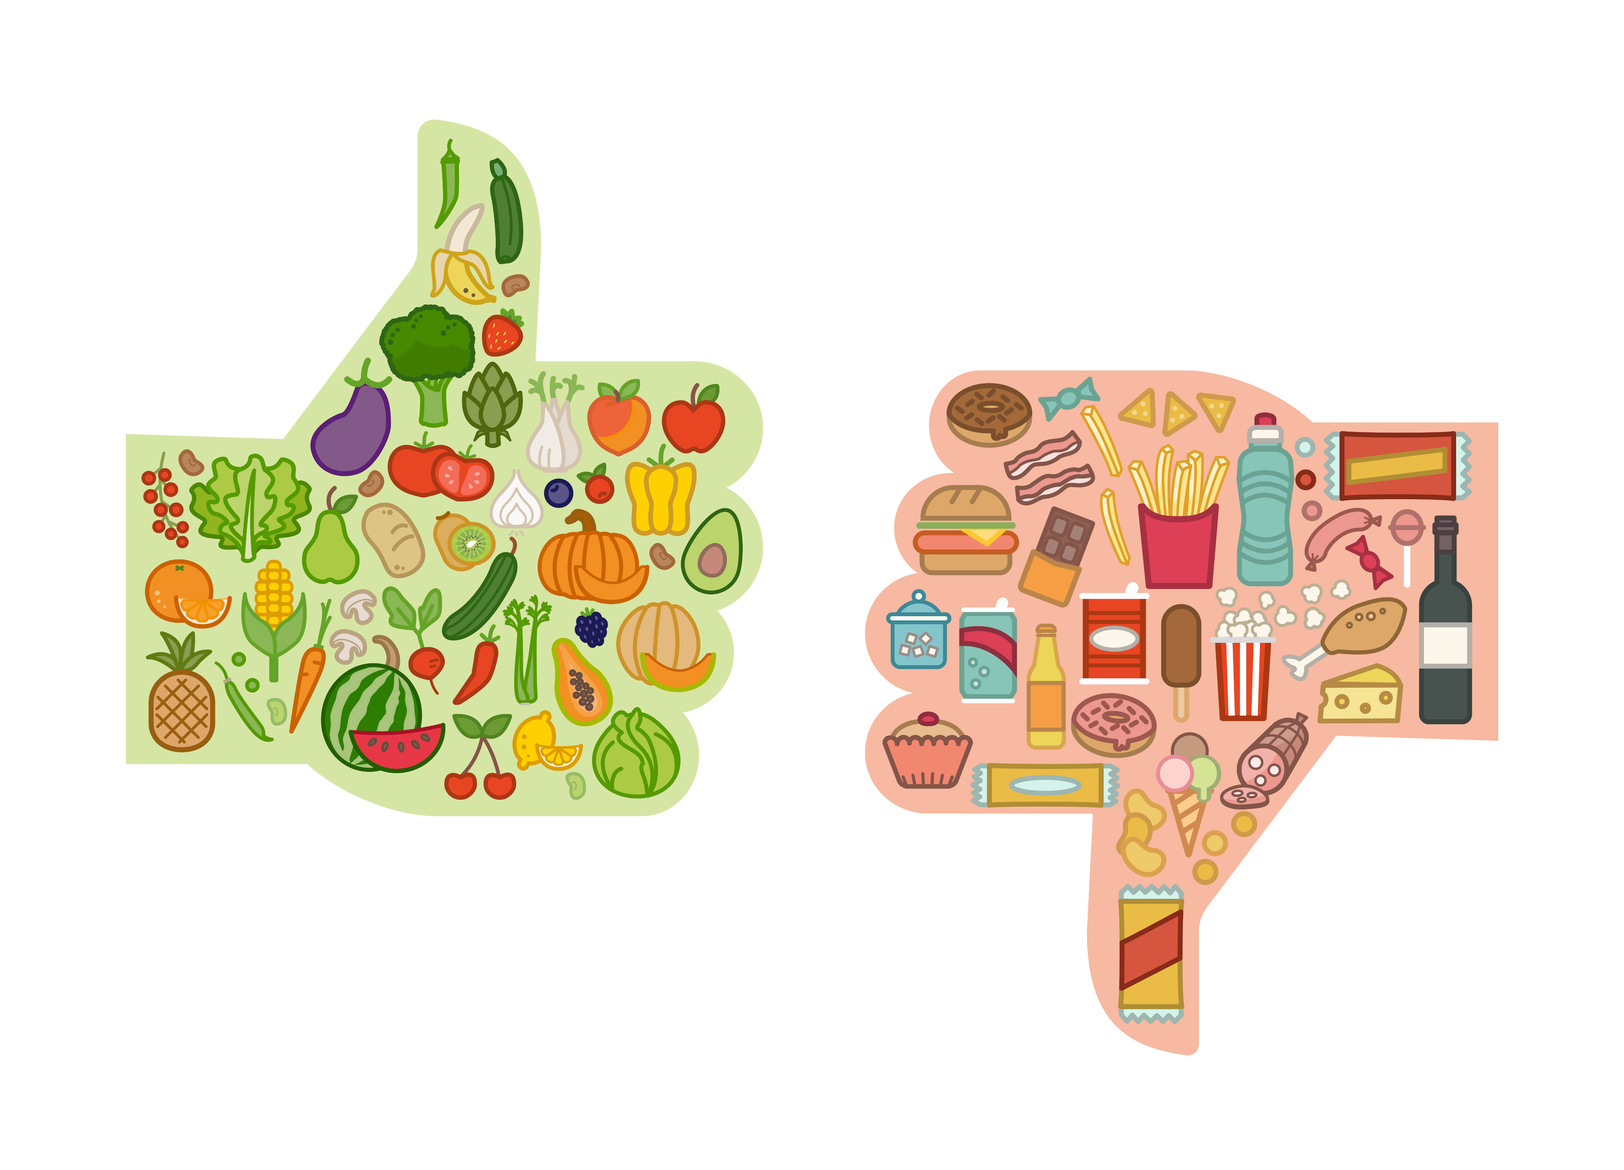 Healthy fresh vegetables and unhealthy junk food comparison with thumbs up and down, healthy eating and diet concept